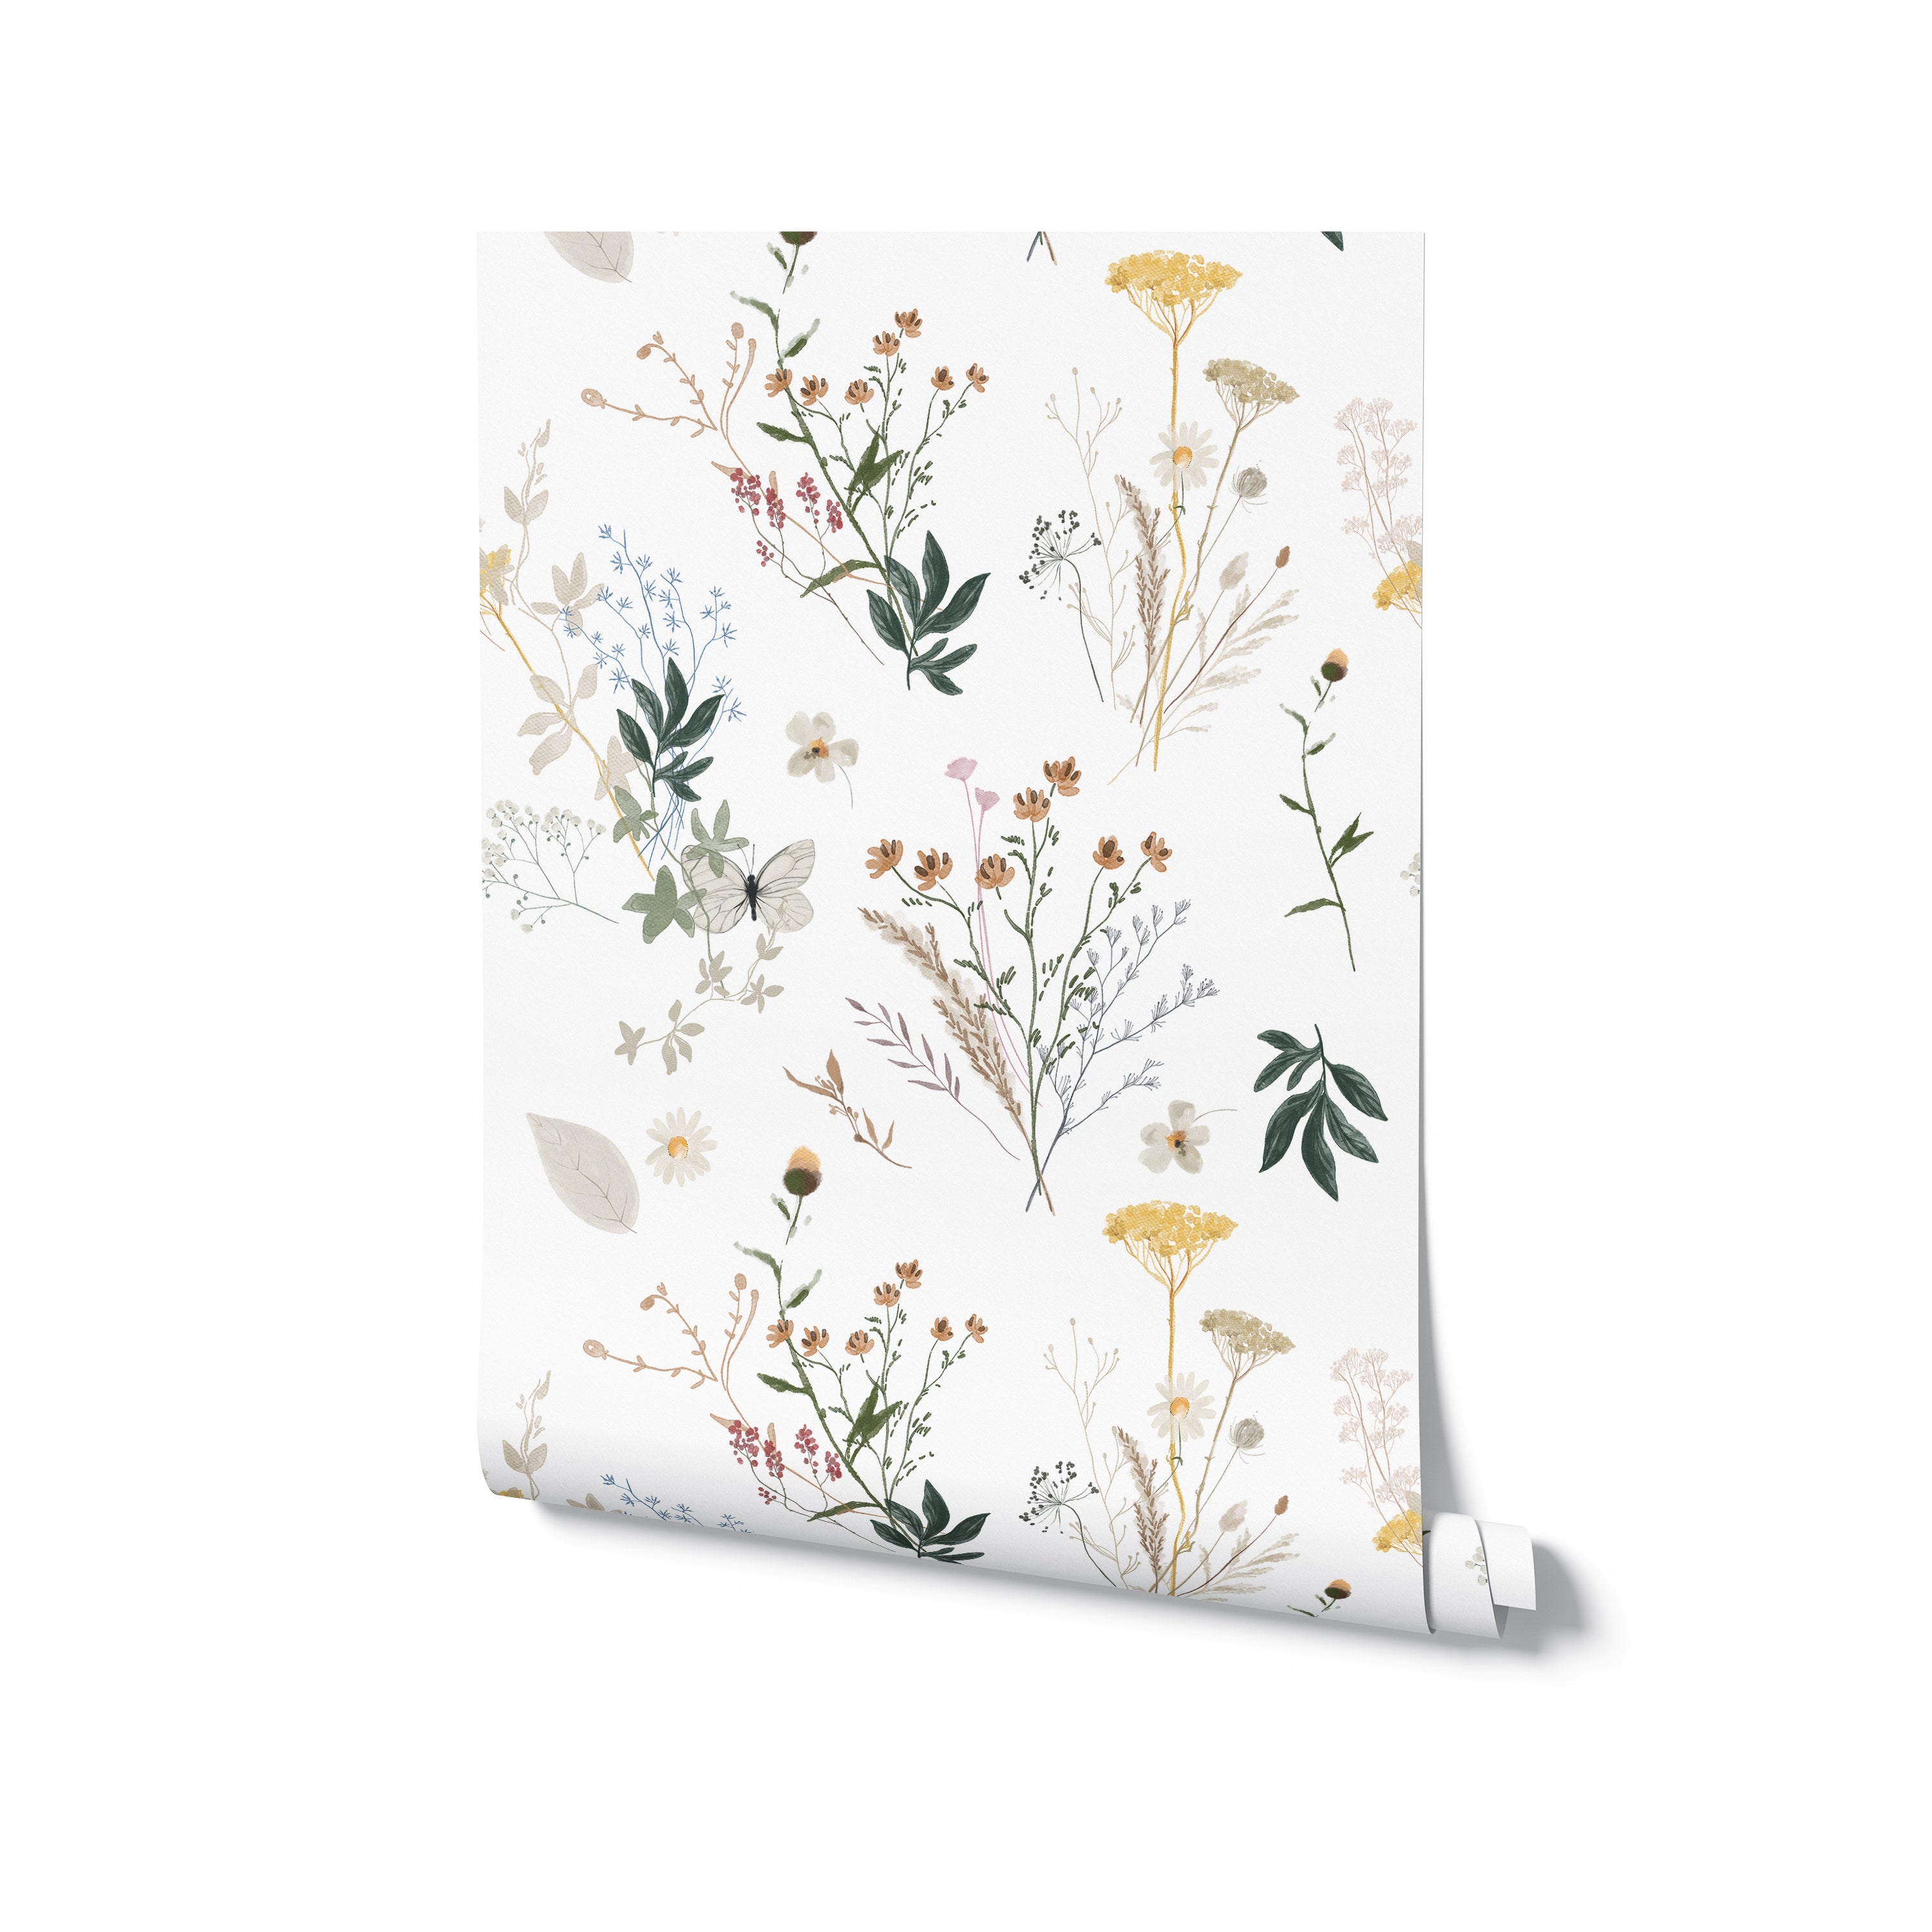 A roll of floral wallpaper with a white background, displaying an elegant print of wildflowers, leaves, and seed pods in soft hues of yellow, pink, green, and blue, suggesting a gentle and naturalistic decor style.